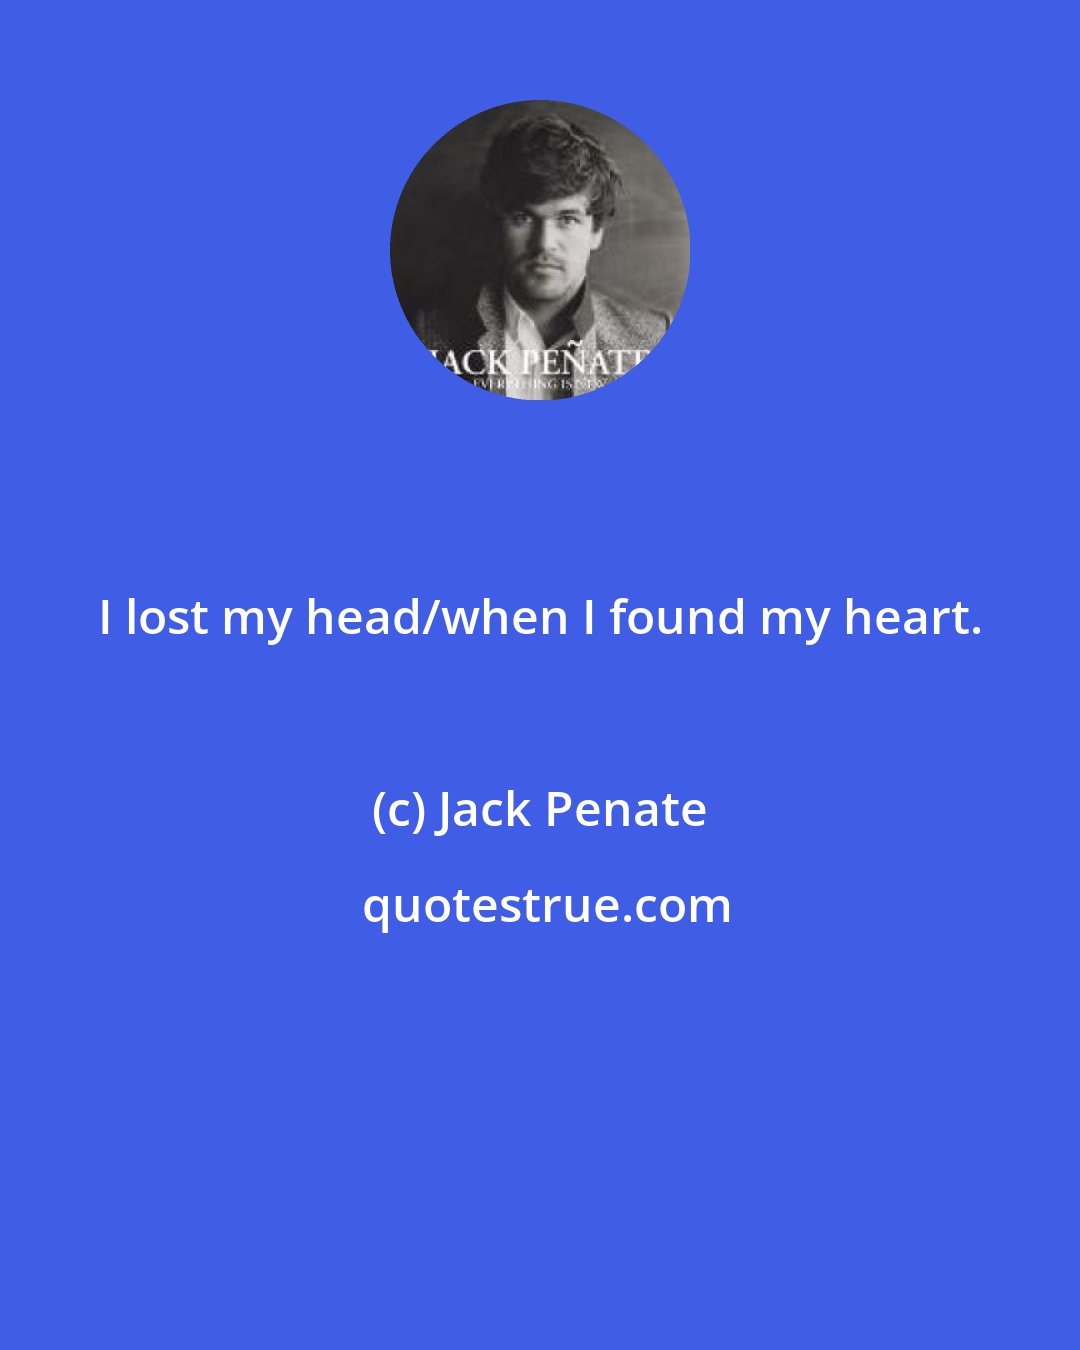 Jack Penate: I lost my head/when I found my heart.